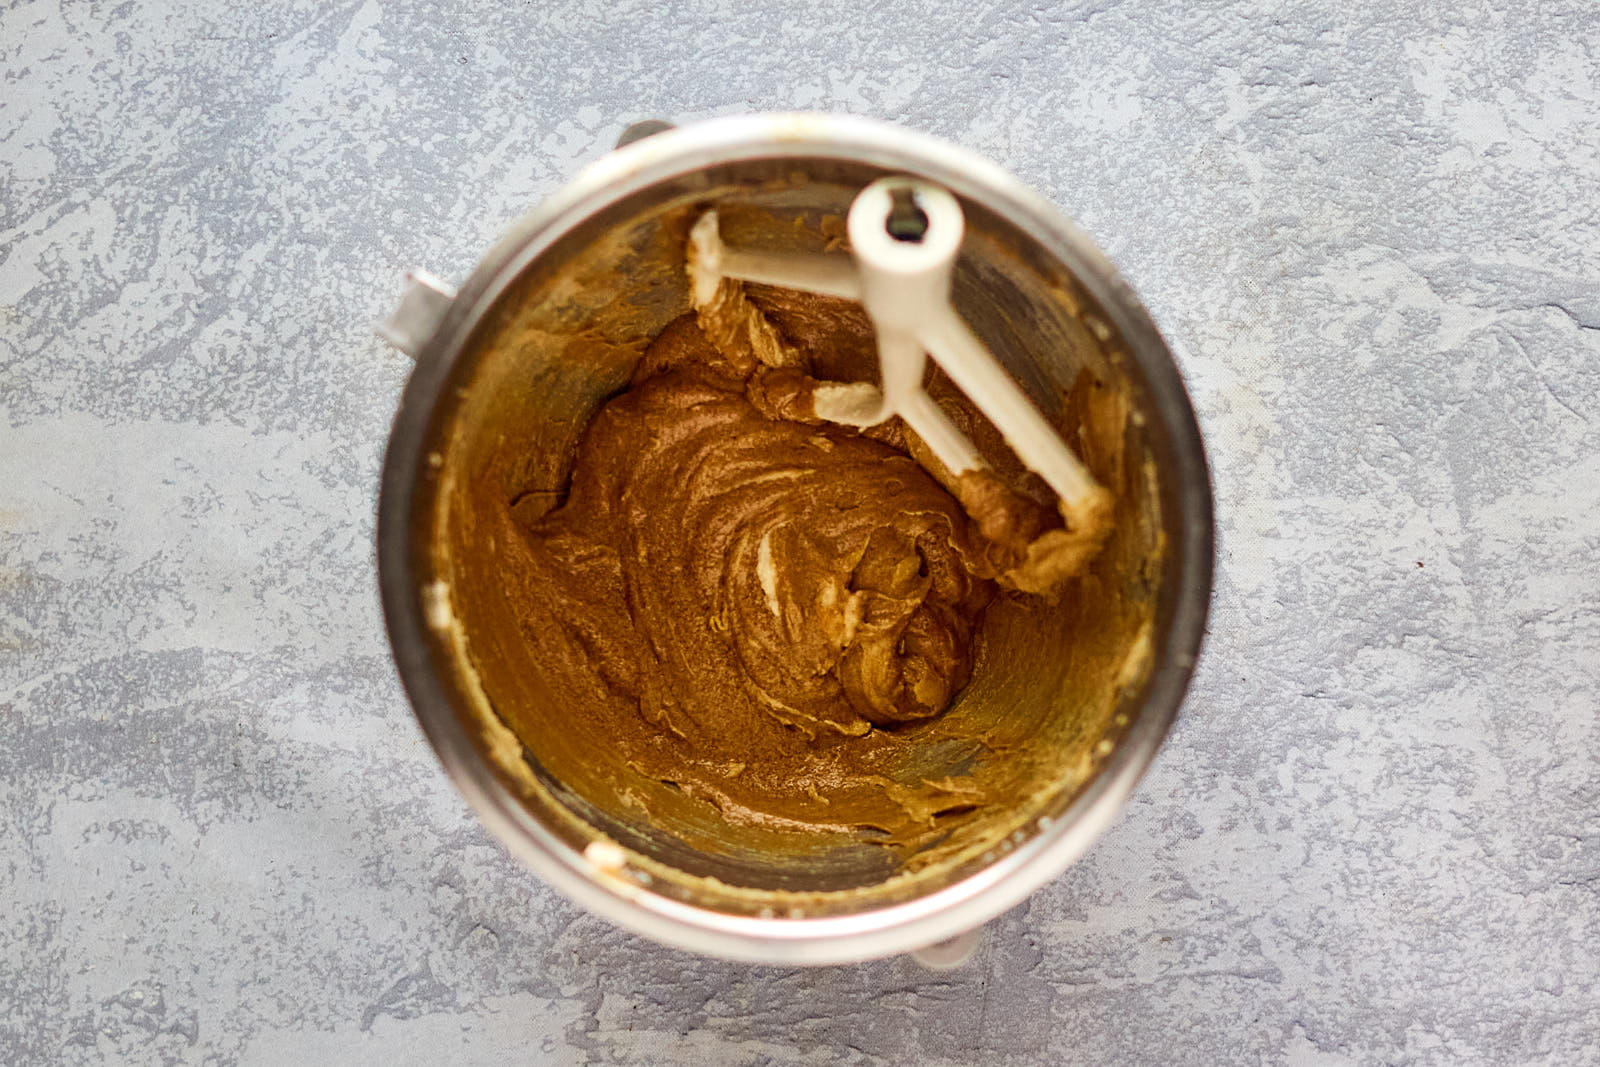 A mixing bowl filled with wet gingerbread batter ingredients creamed together.